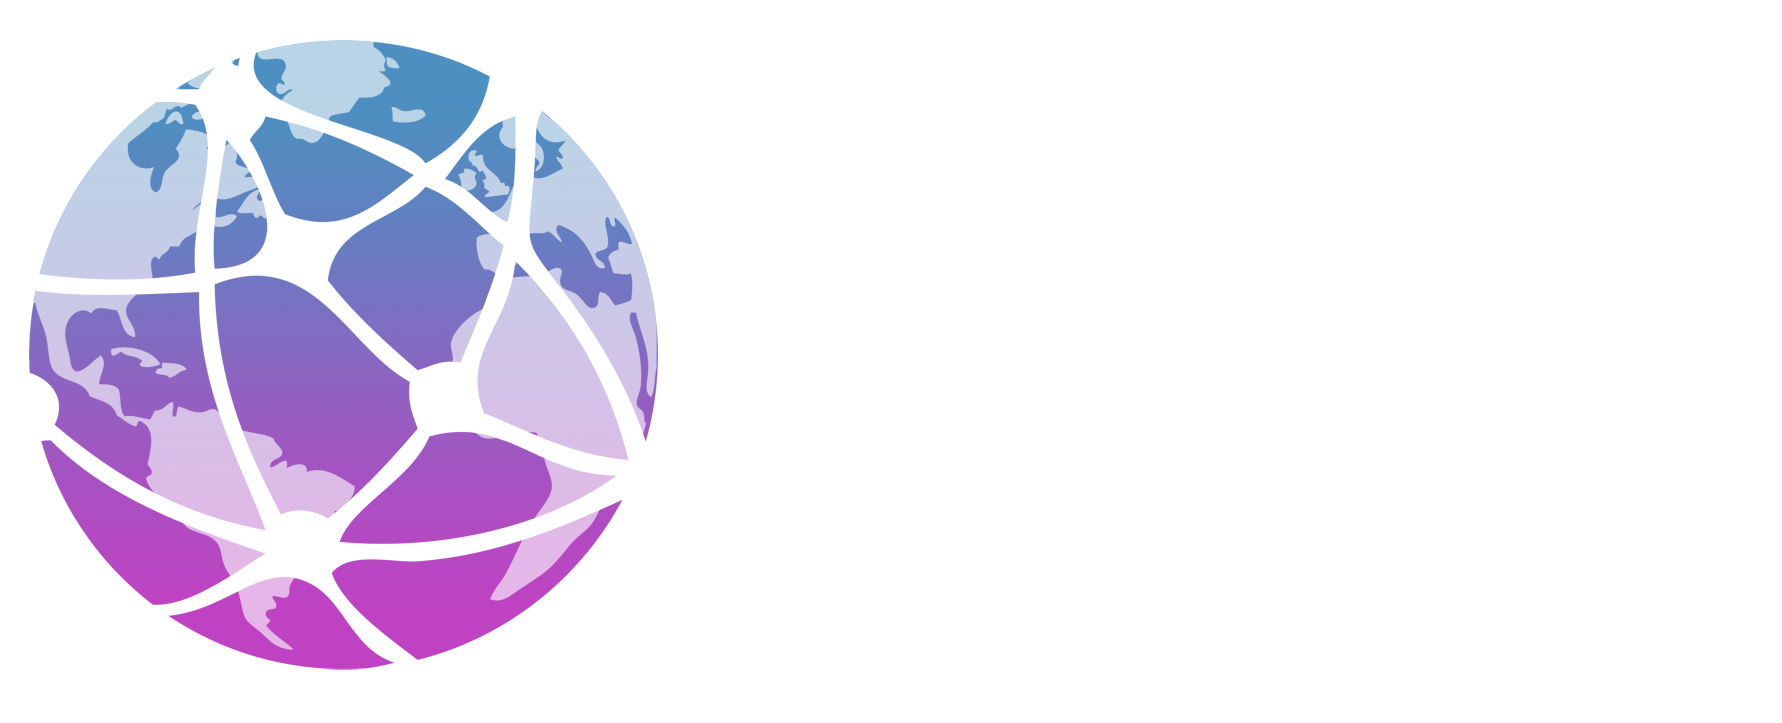 Global Staffing Services, Professional Recruiting Specialists. recruitment consultants, job candidate searches, nationwide recruitment, executive and professional search company